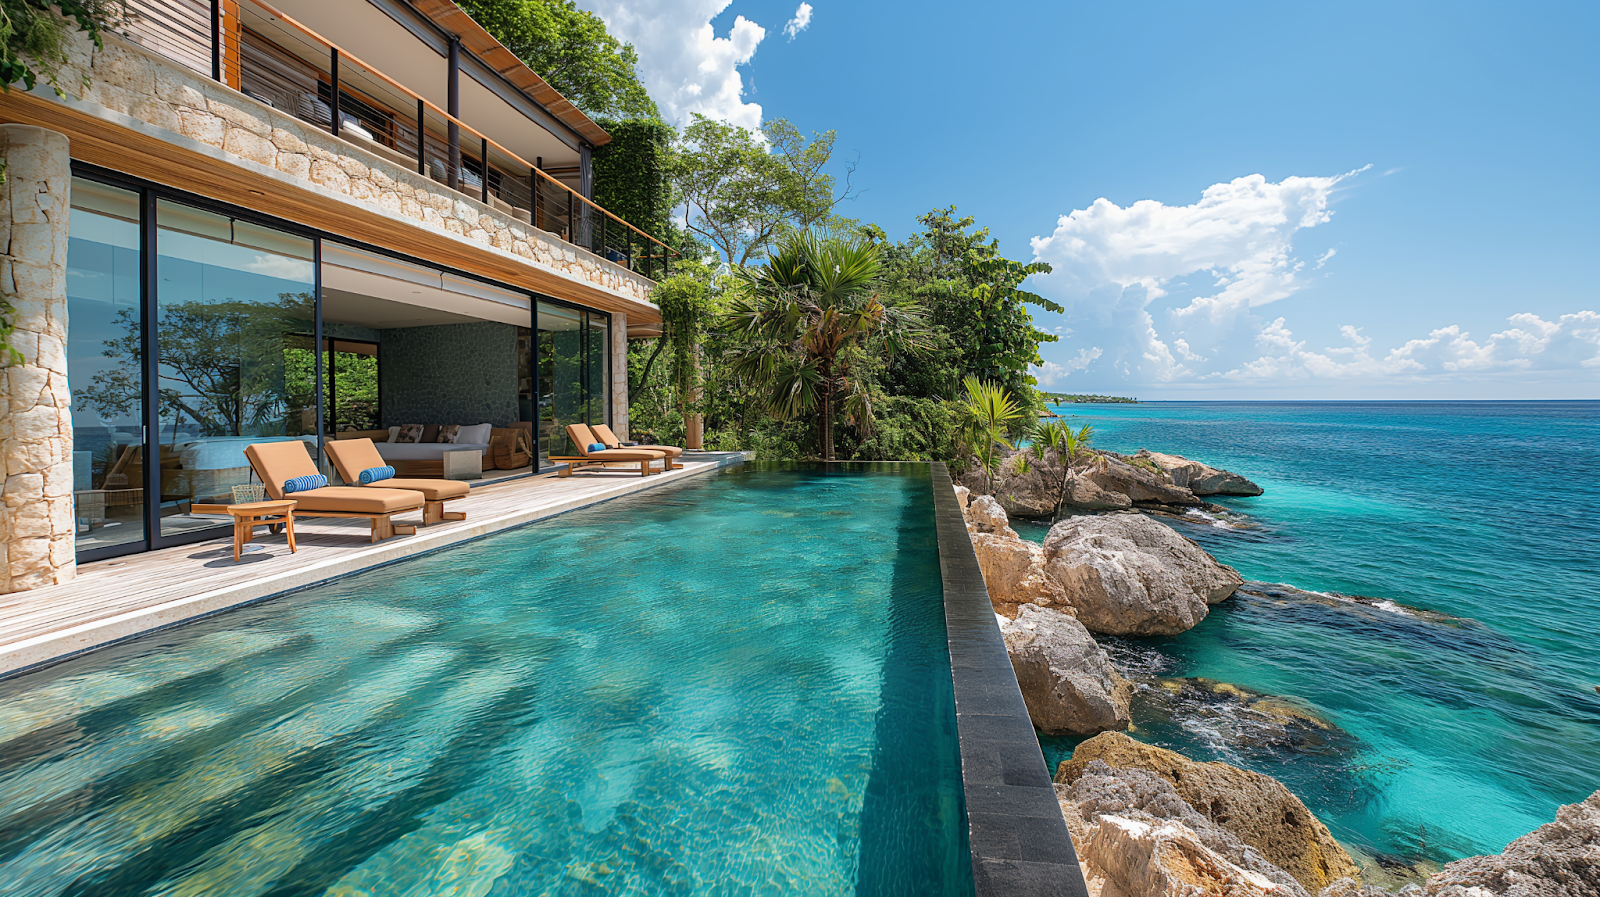 Luxury villa in Riviera Maya with tropical surroundings and private pool